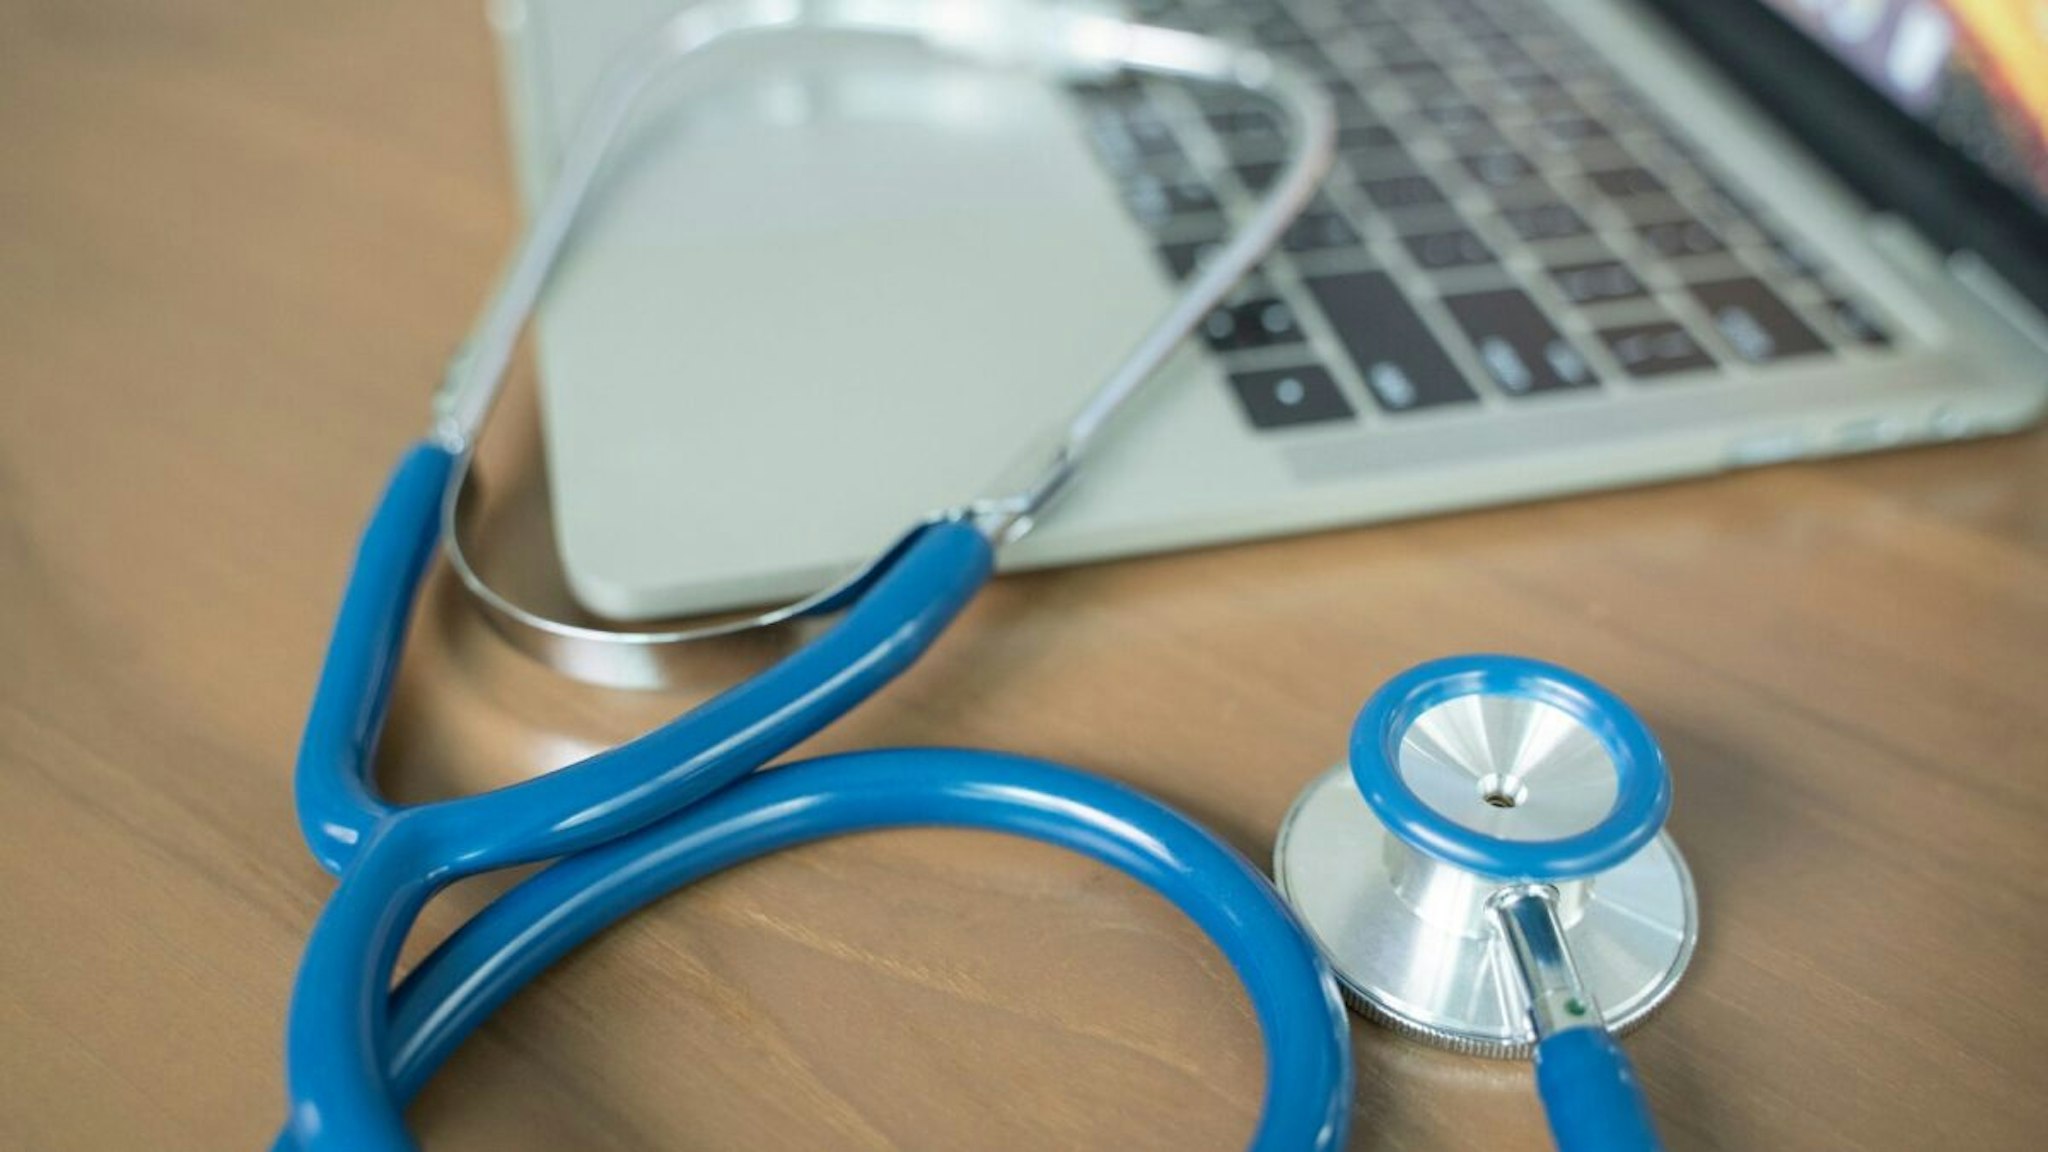 Doctor's desk with stethoscope and laptop. - stock photo